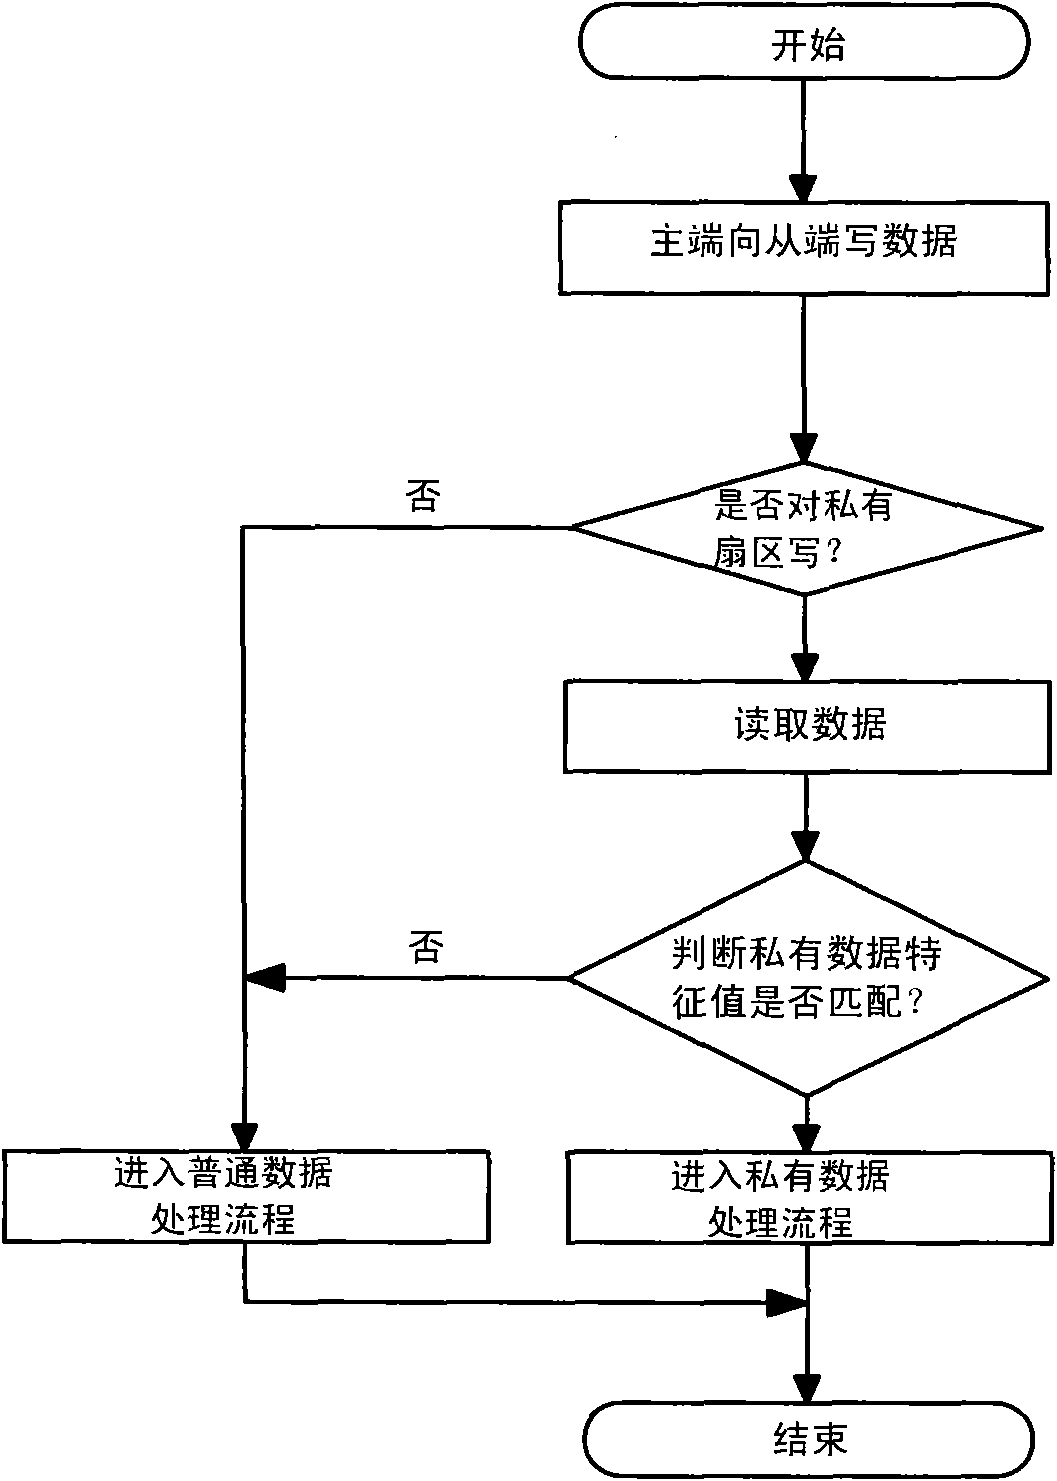 Data transmission method of SD card controller